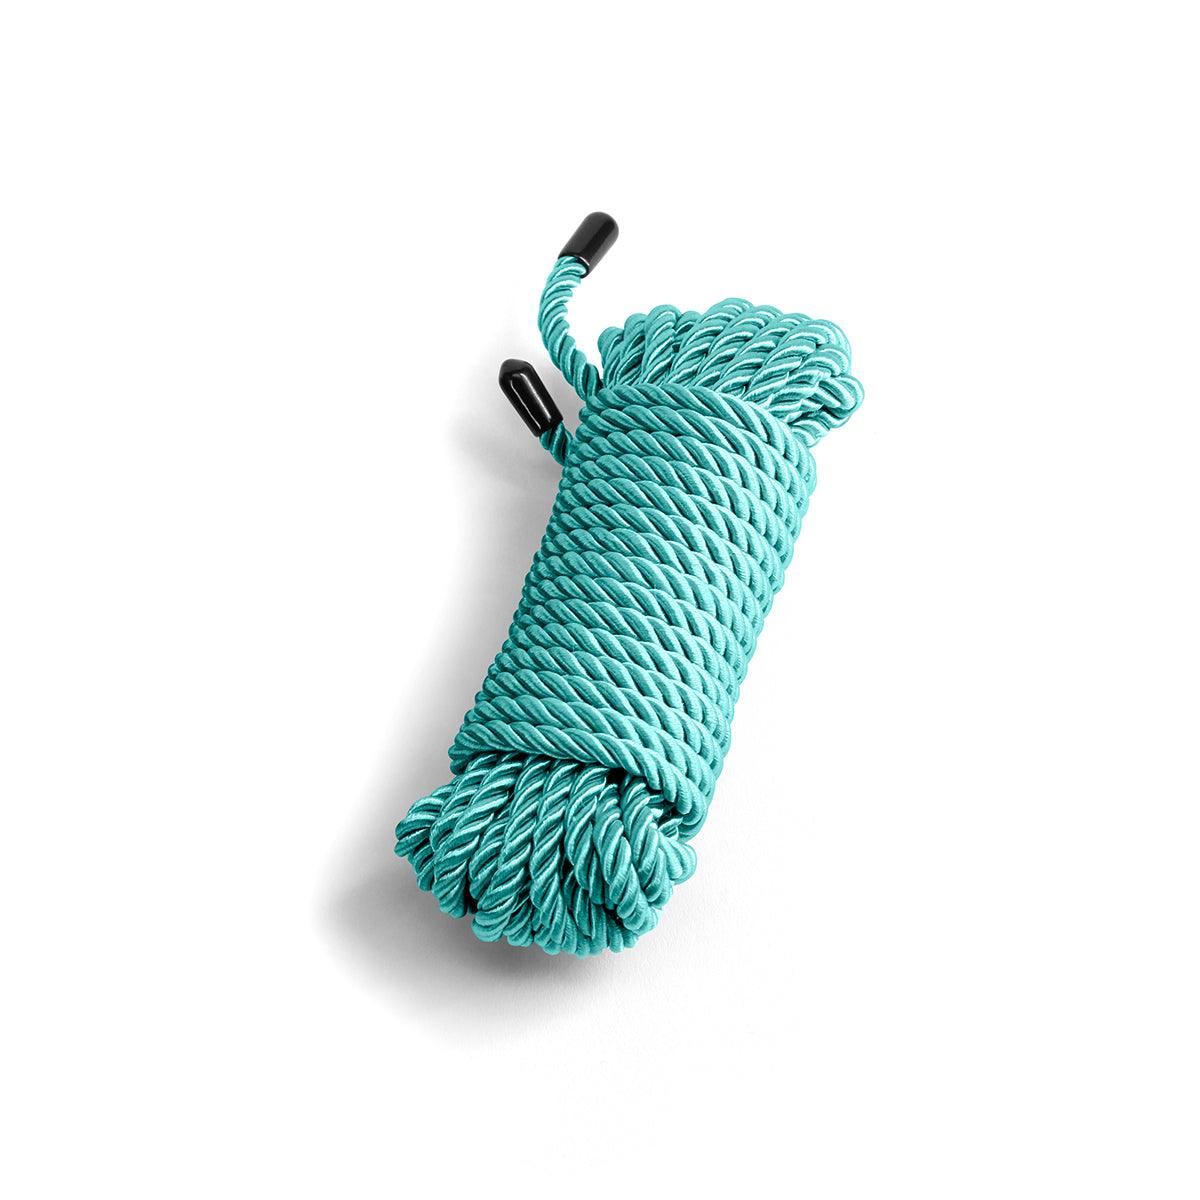 Bound Rope 25ft - Green - shop enby